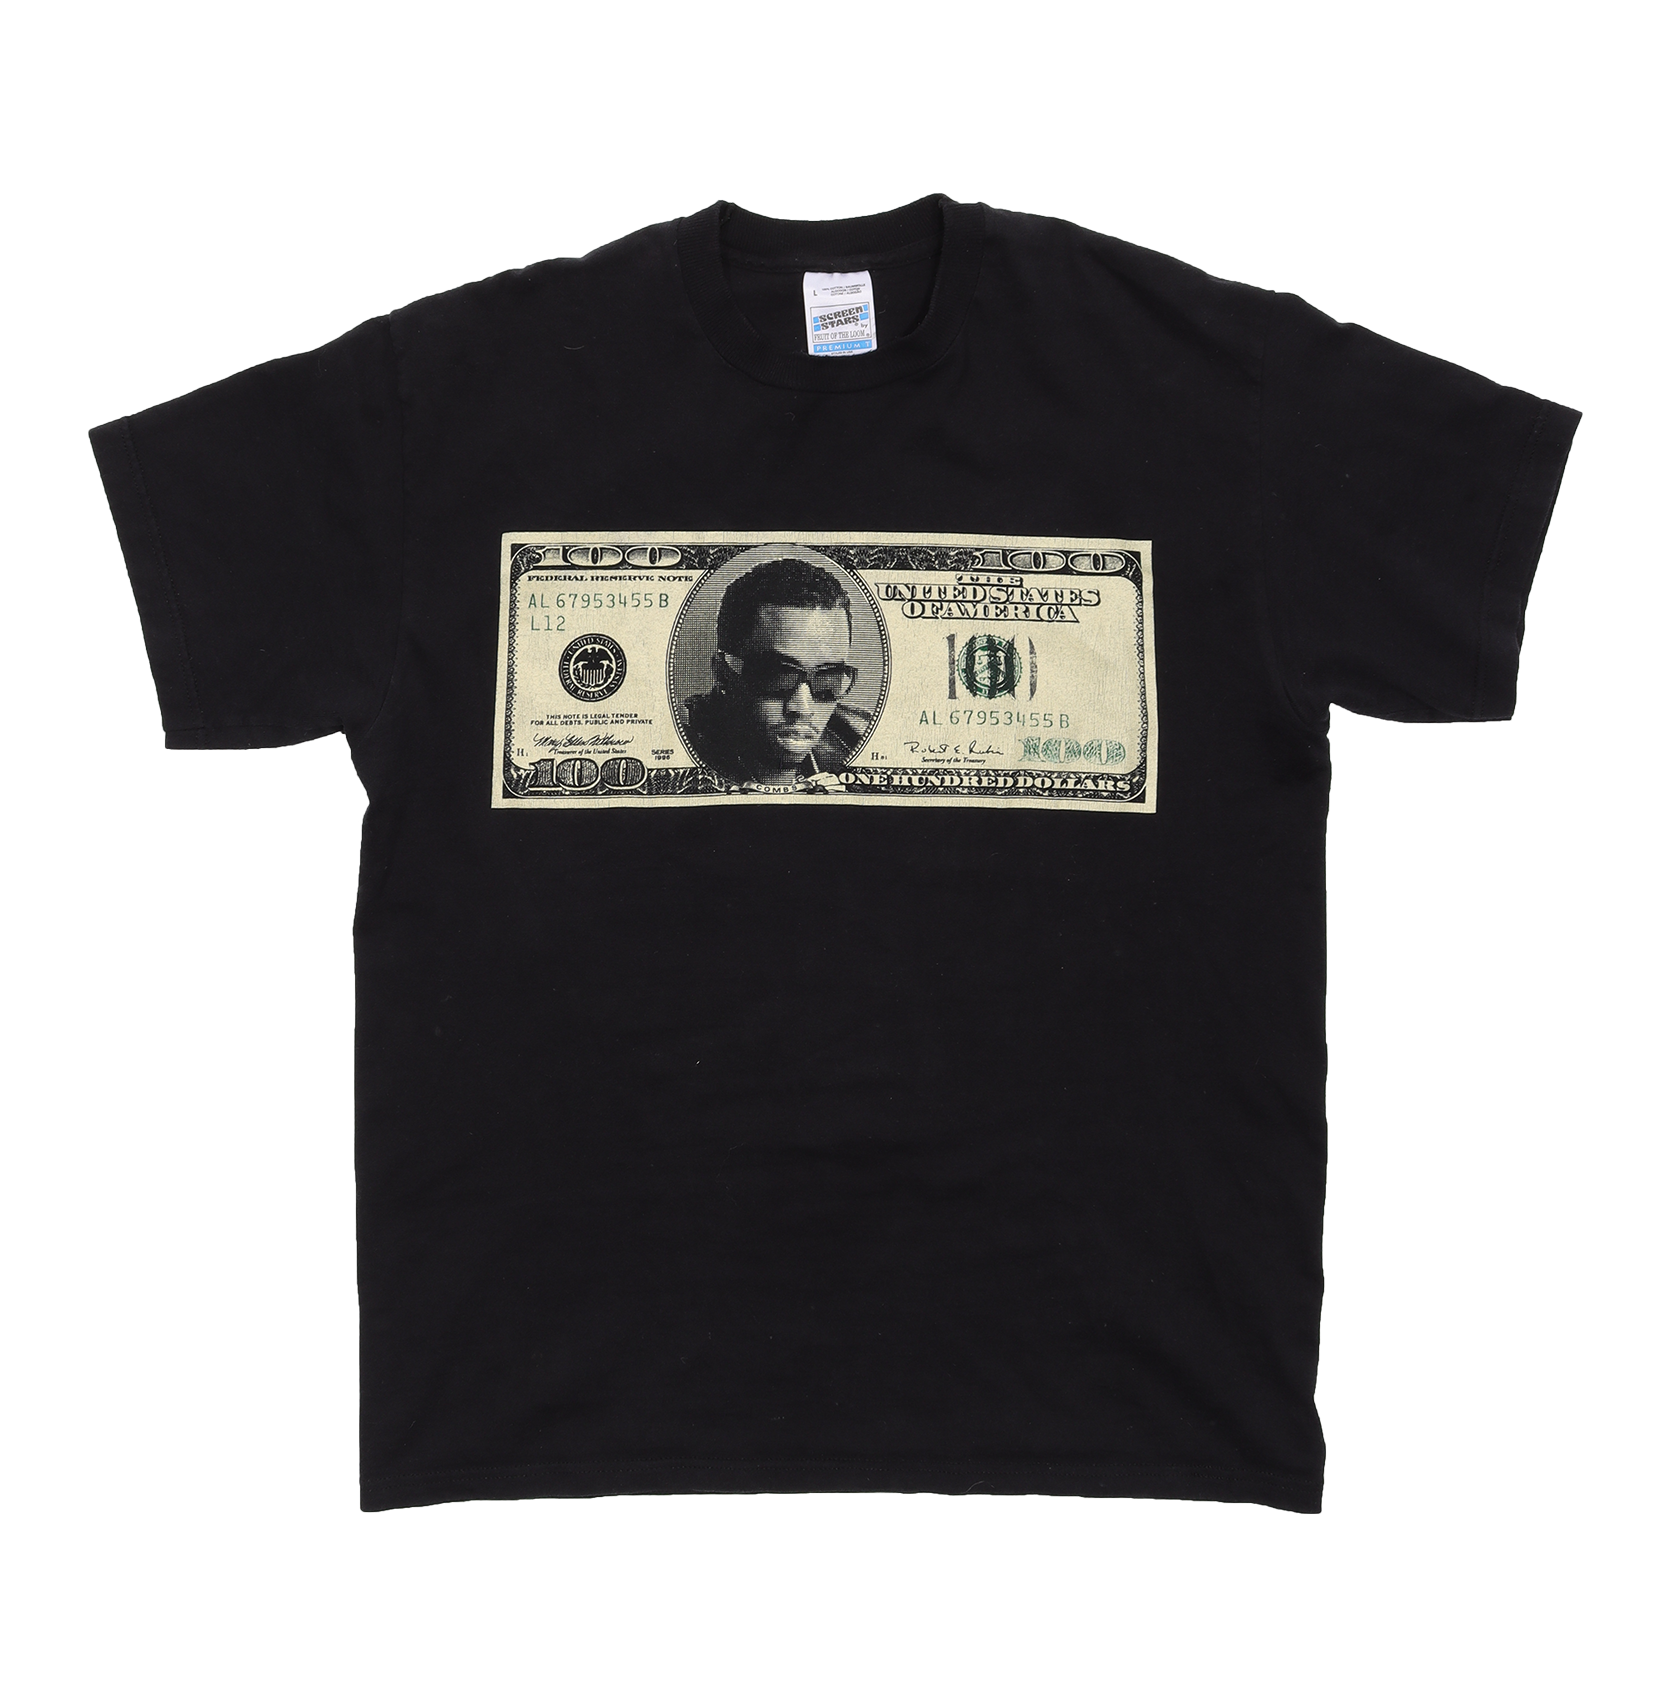 Diddy "It's All About The Benjamin's" T-Shirt